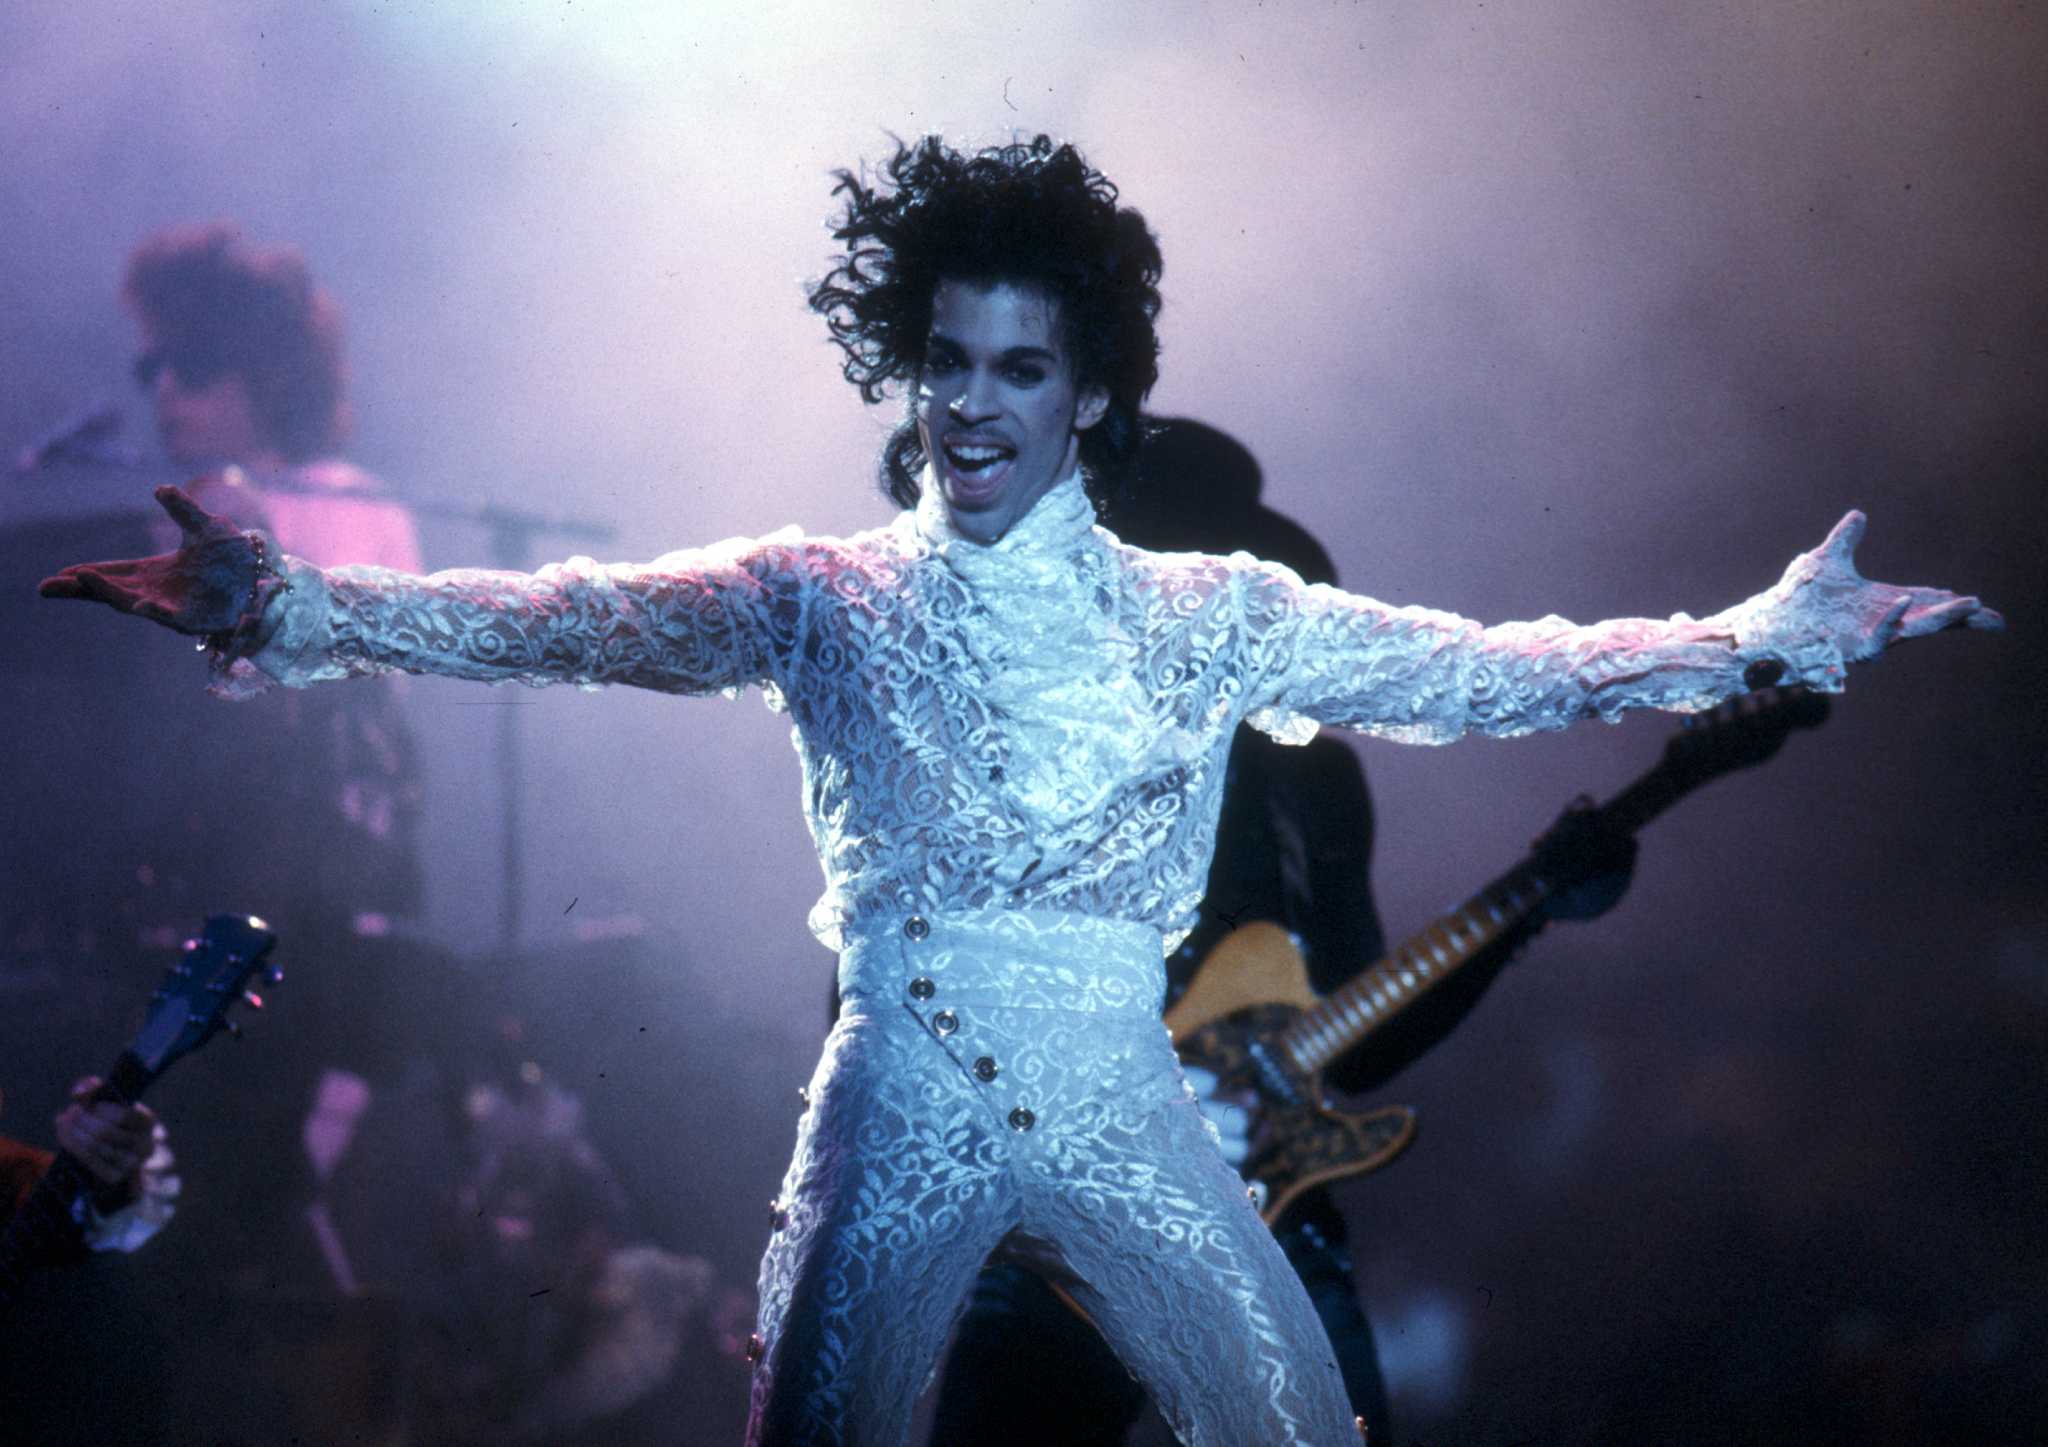 Michael vs Prince in the 80s was one of the greatest musical